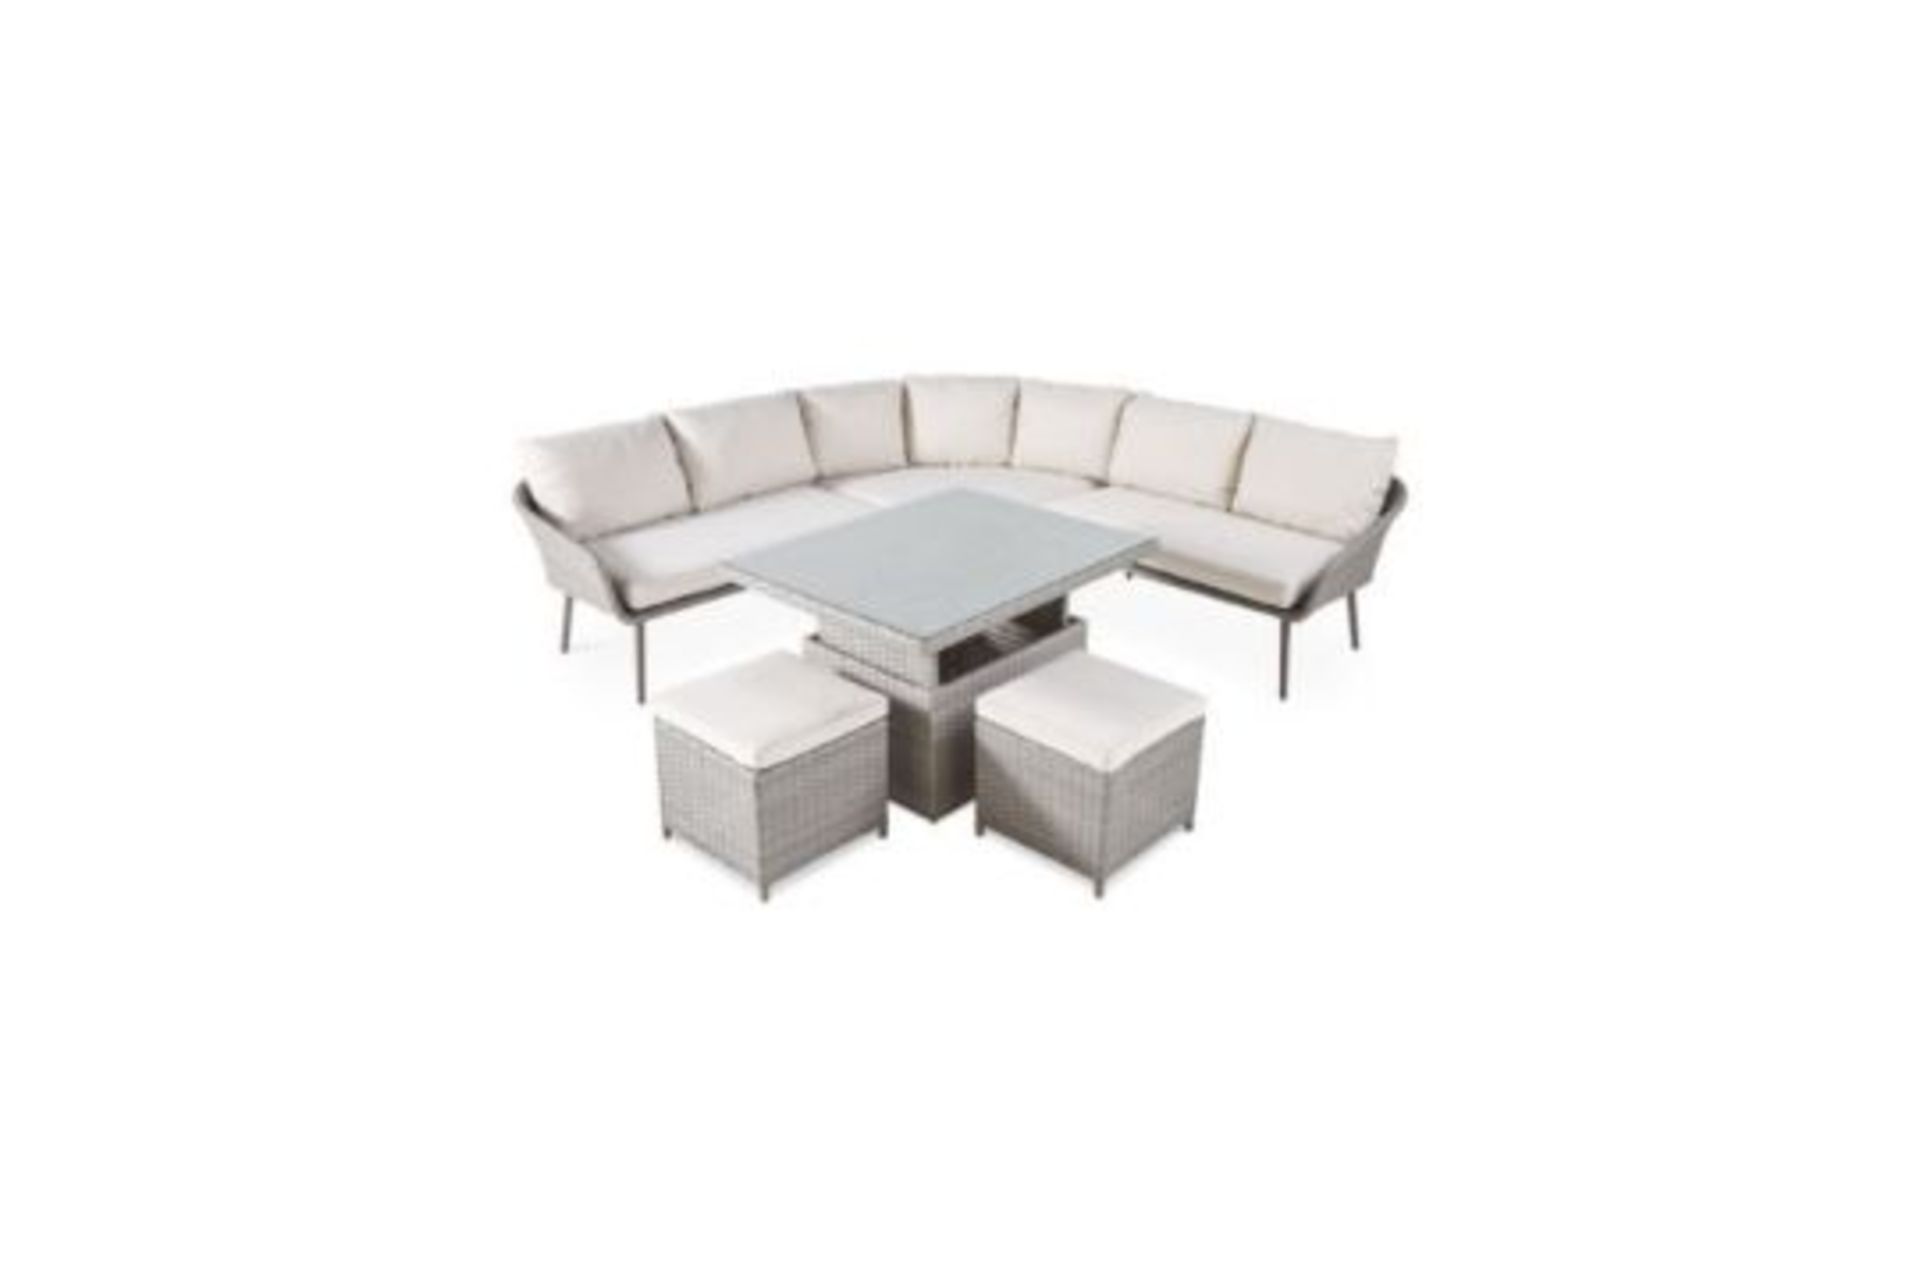 Multifunctional Lounge & Dining Corner Sofa Dining Set. Enjoy the warmer weather with this Luxury - Image 2 of 2